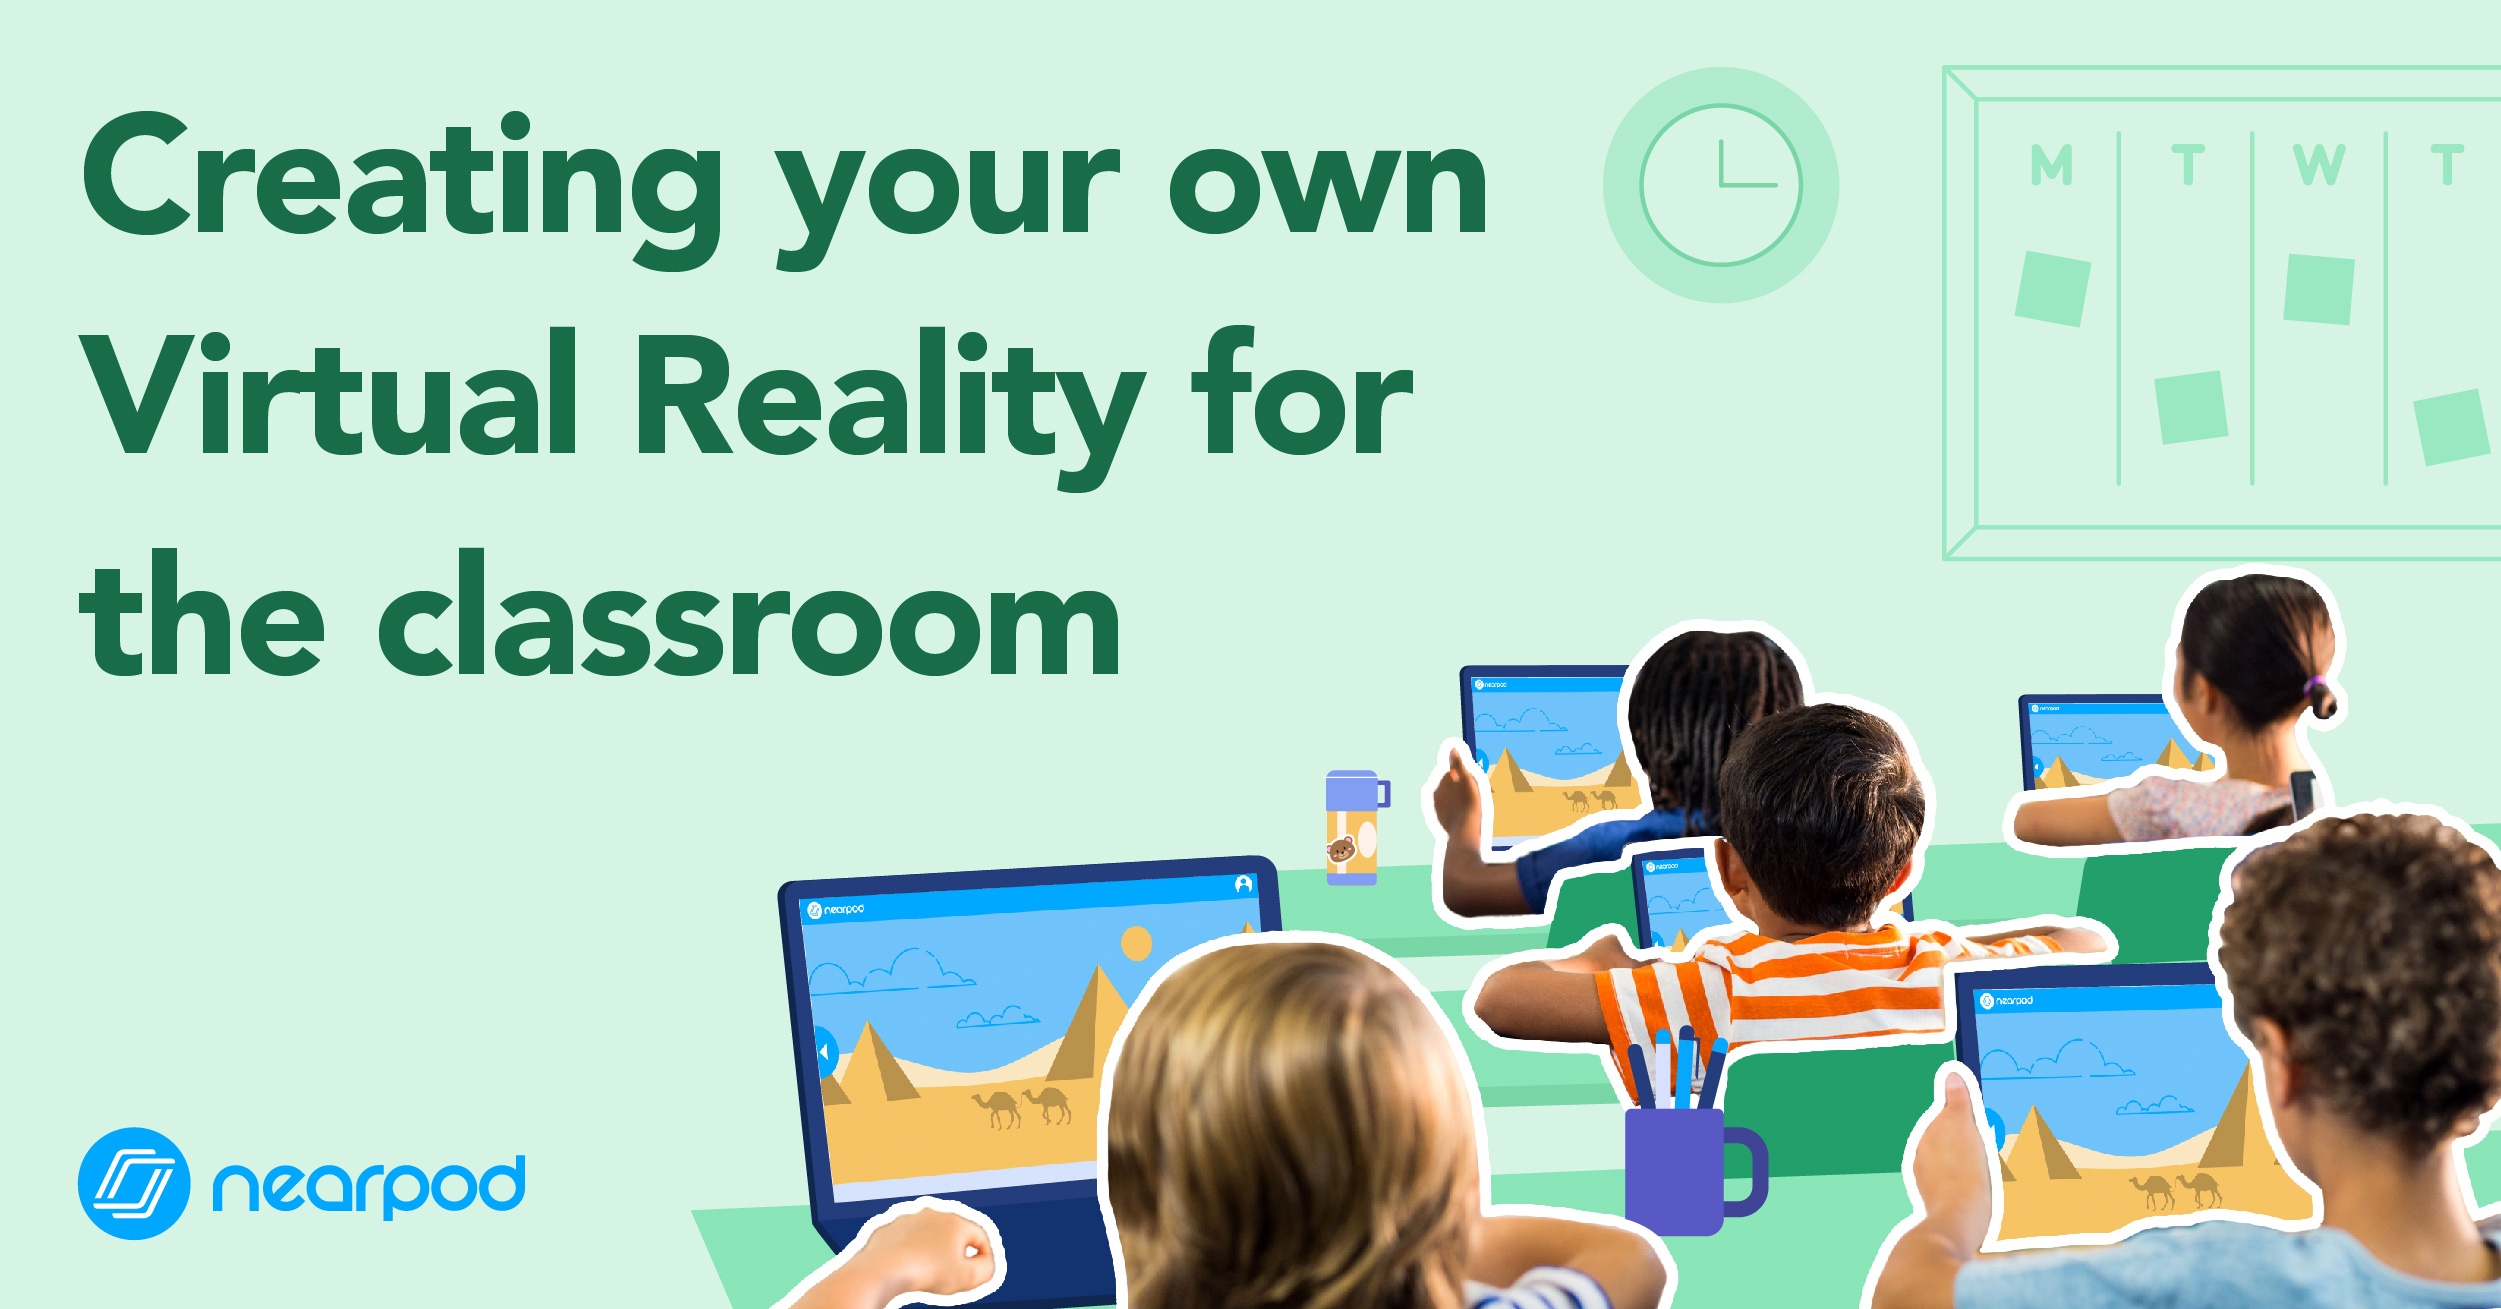 How to create your own Virtual Reality (VR) in the classroom